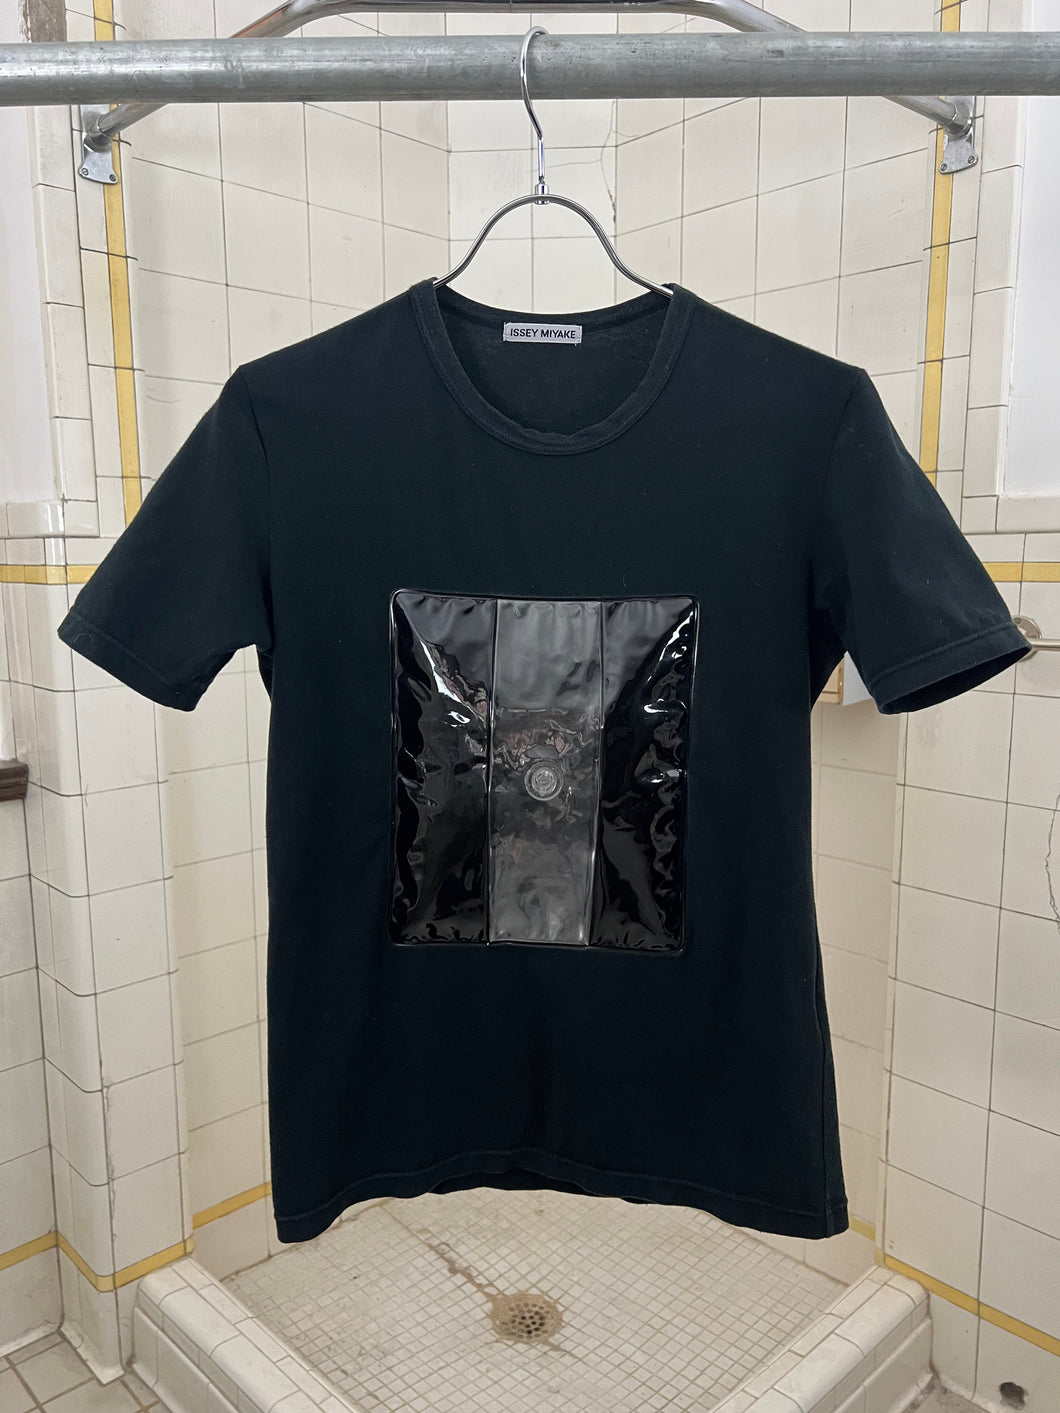 ss1996 Issey Miyake Tee Shirt with Inflatable Plastic Chest - Size M